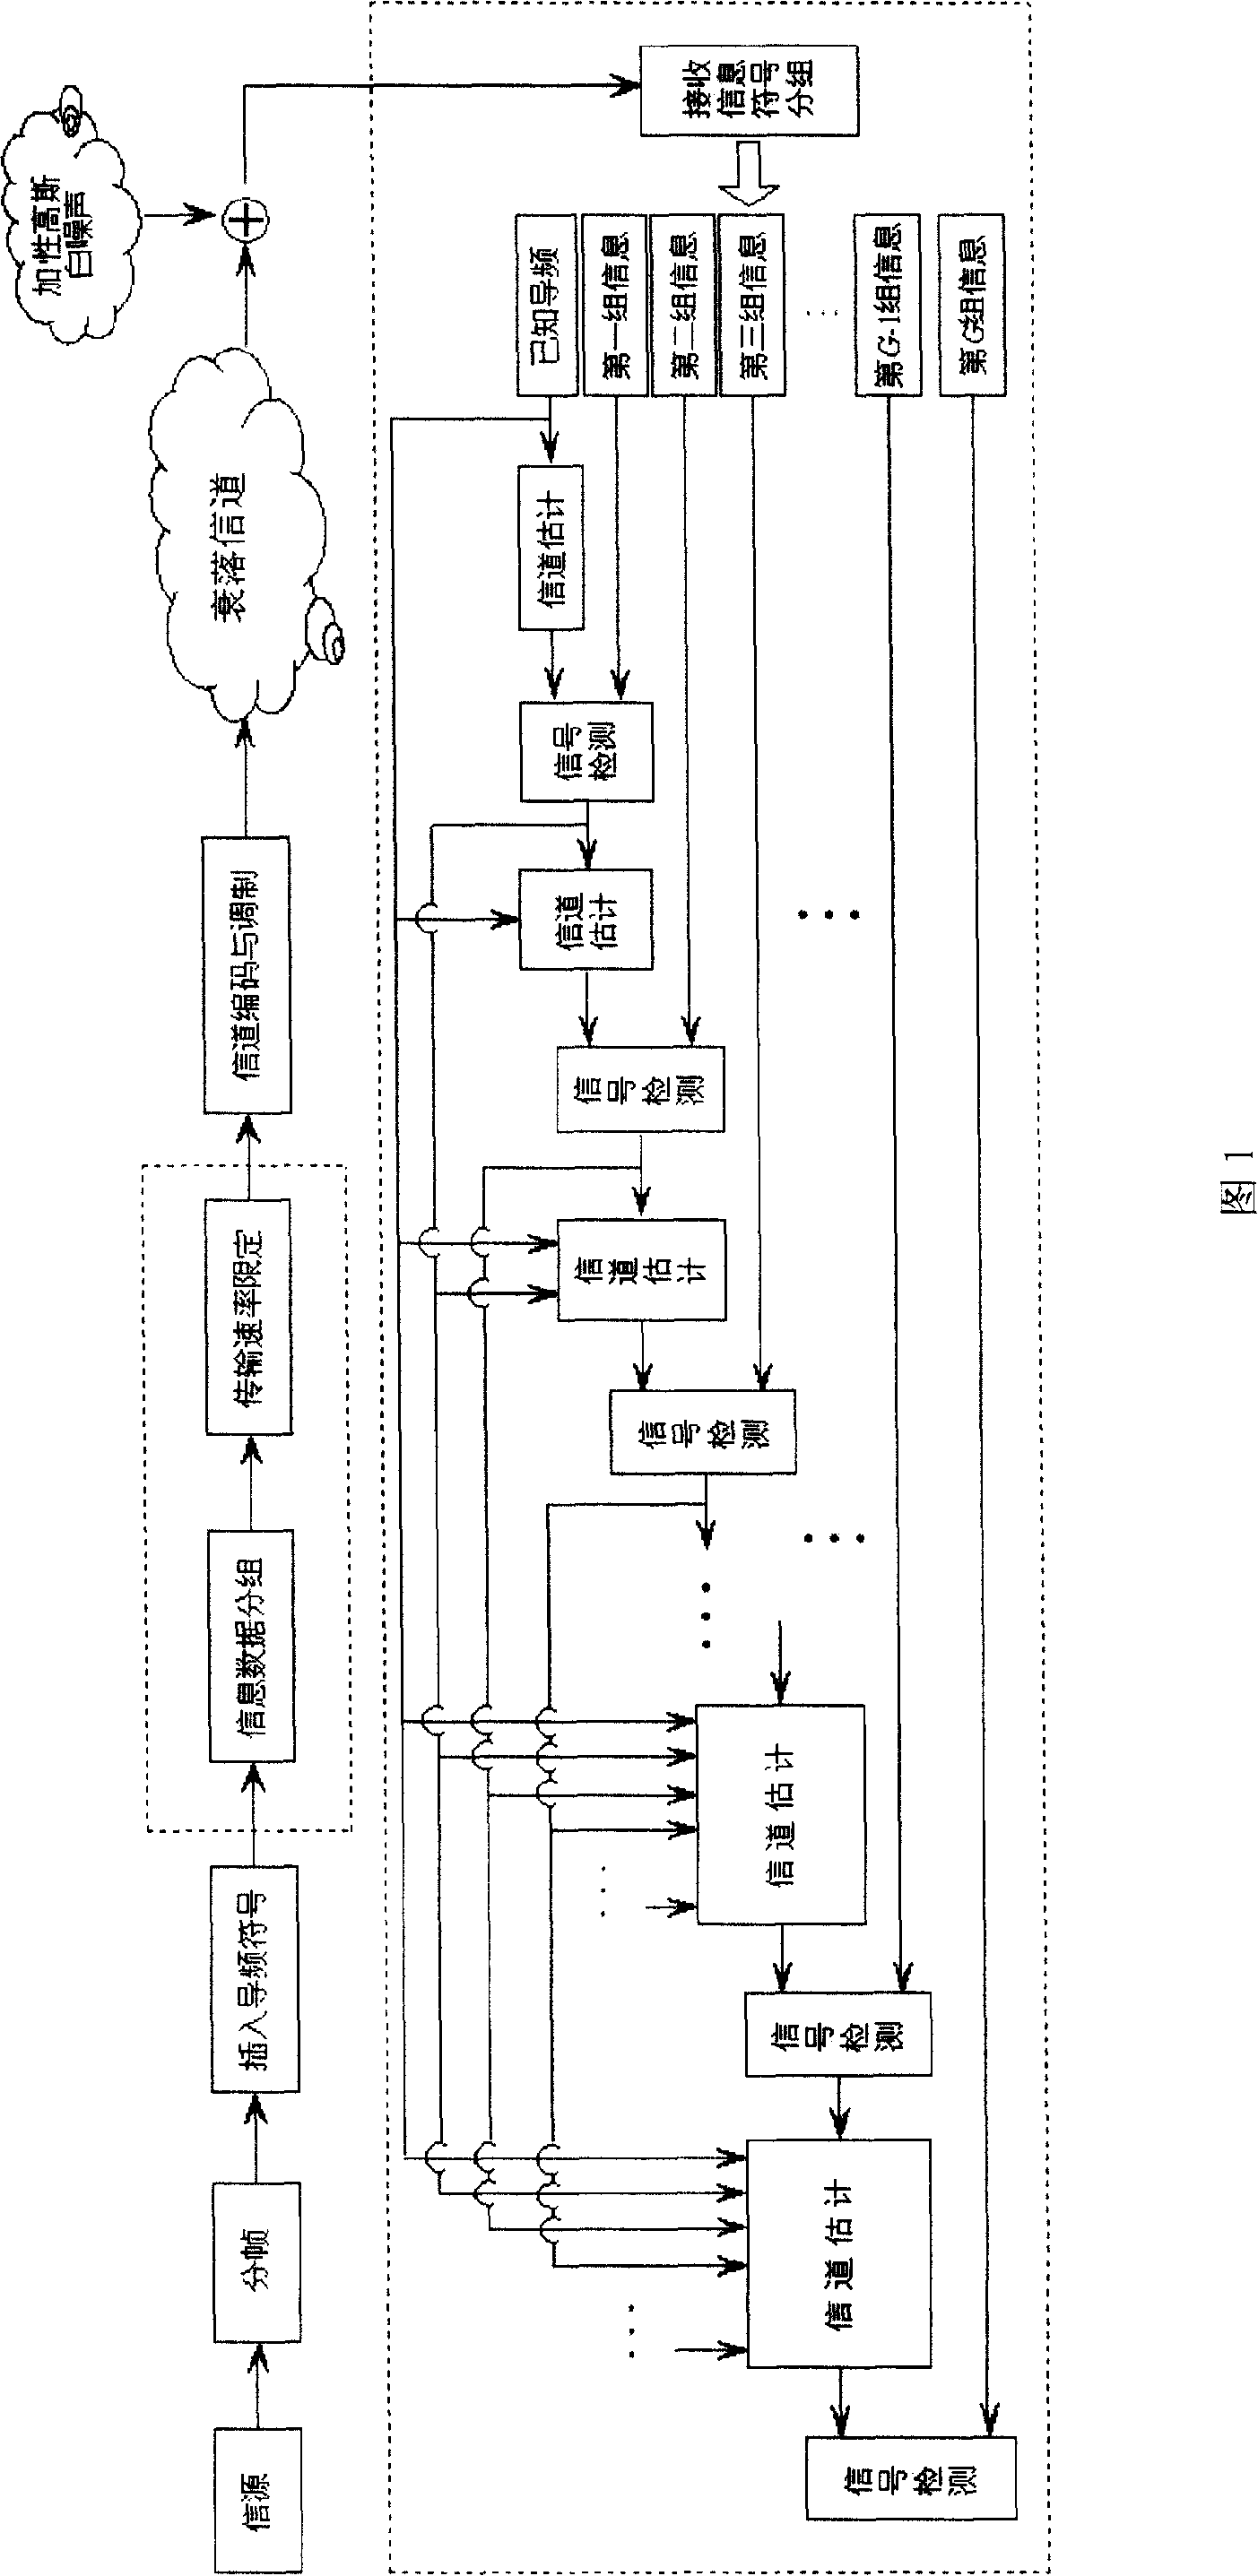 A channel estimate method and corresponding communication method and system